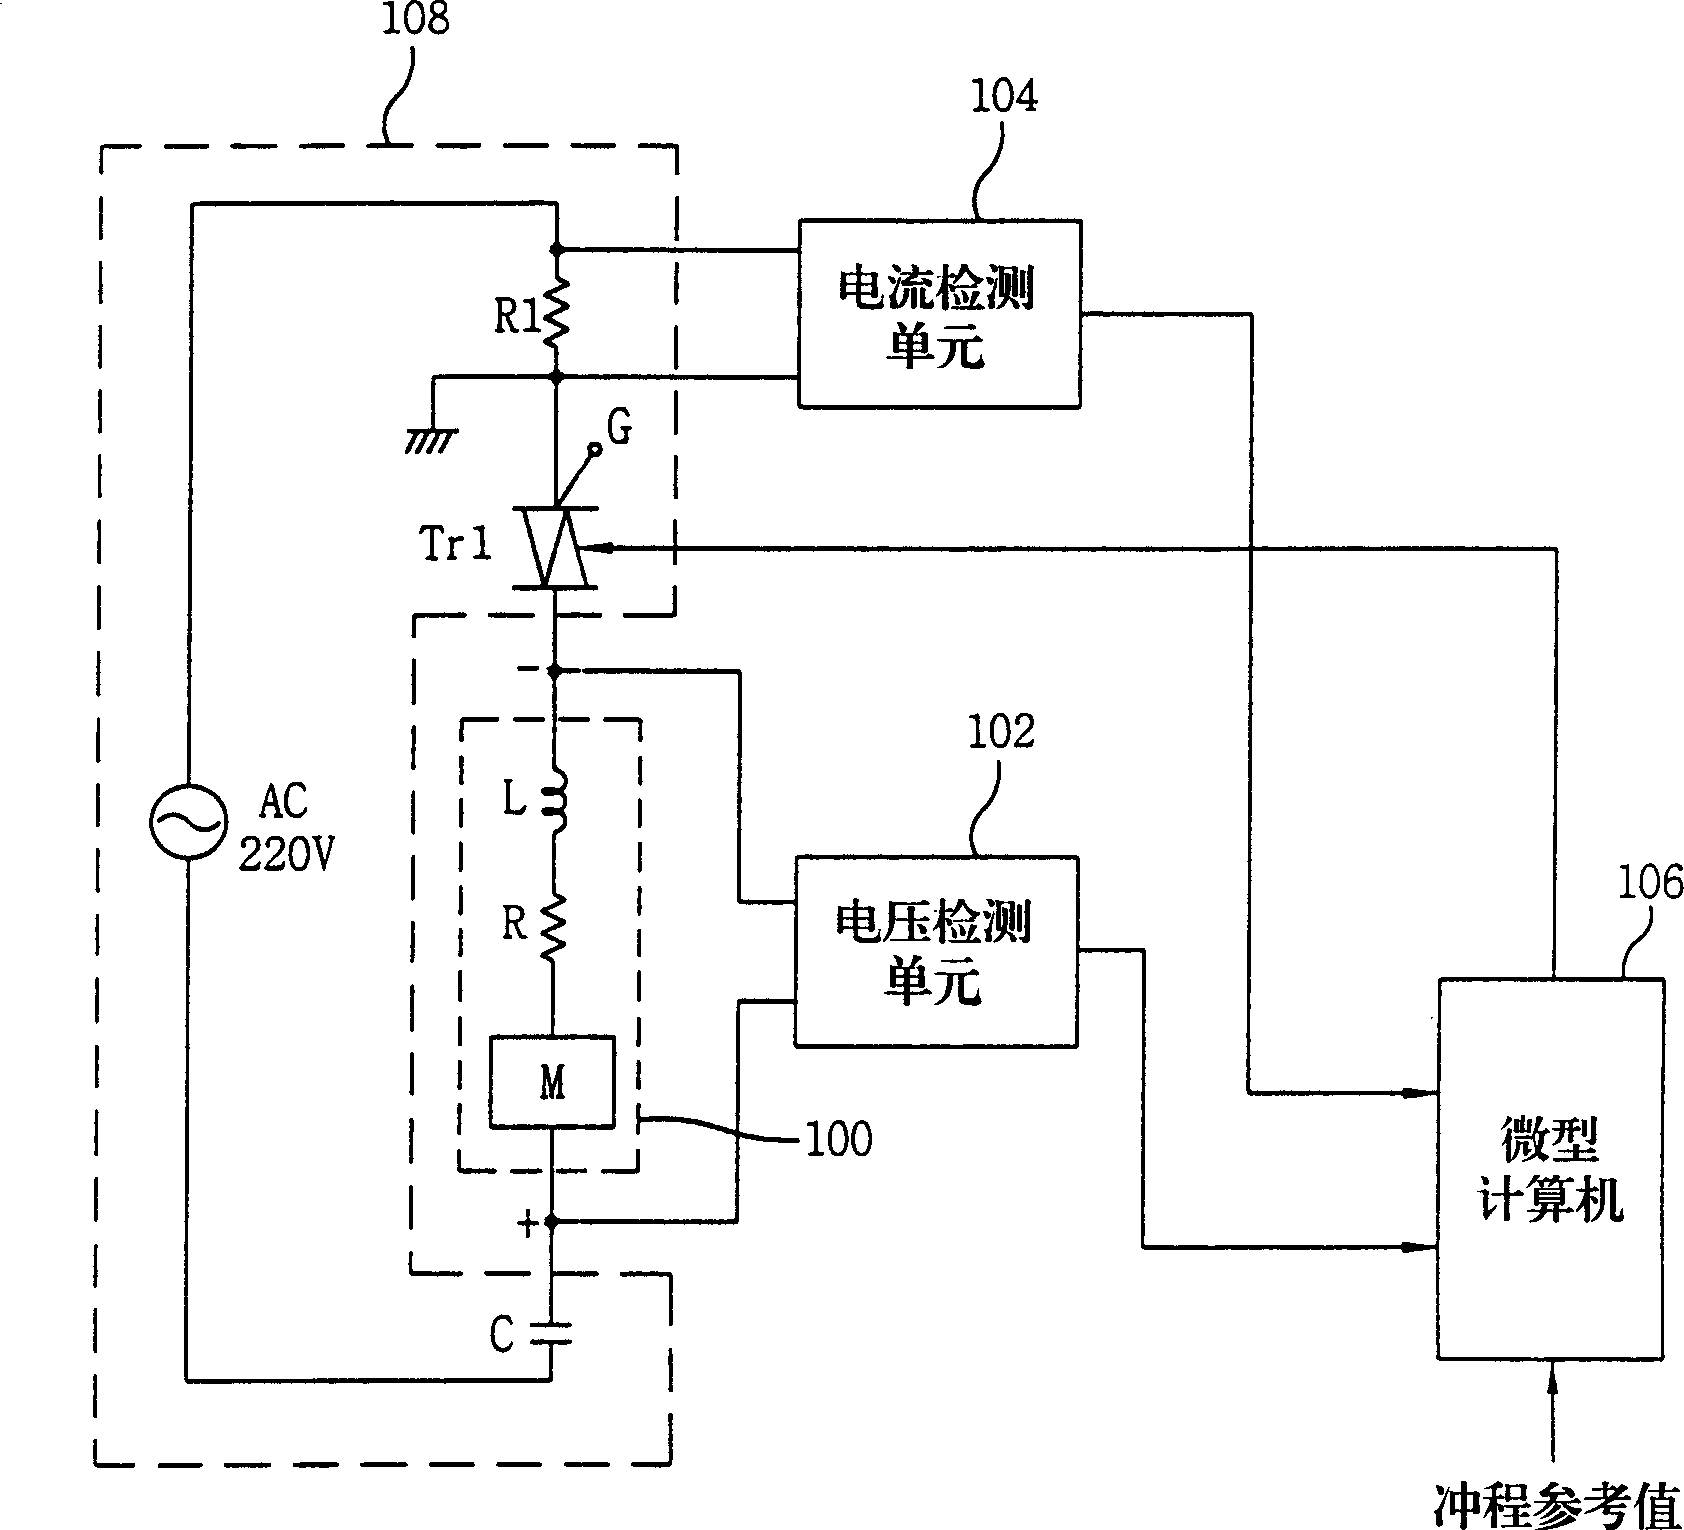 Control driving device and method for reciprocating compressor using linear motor refrigerator